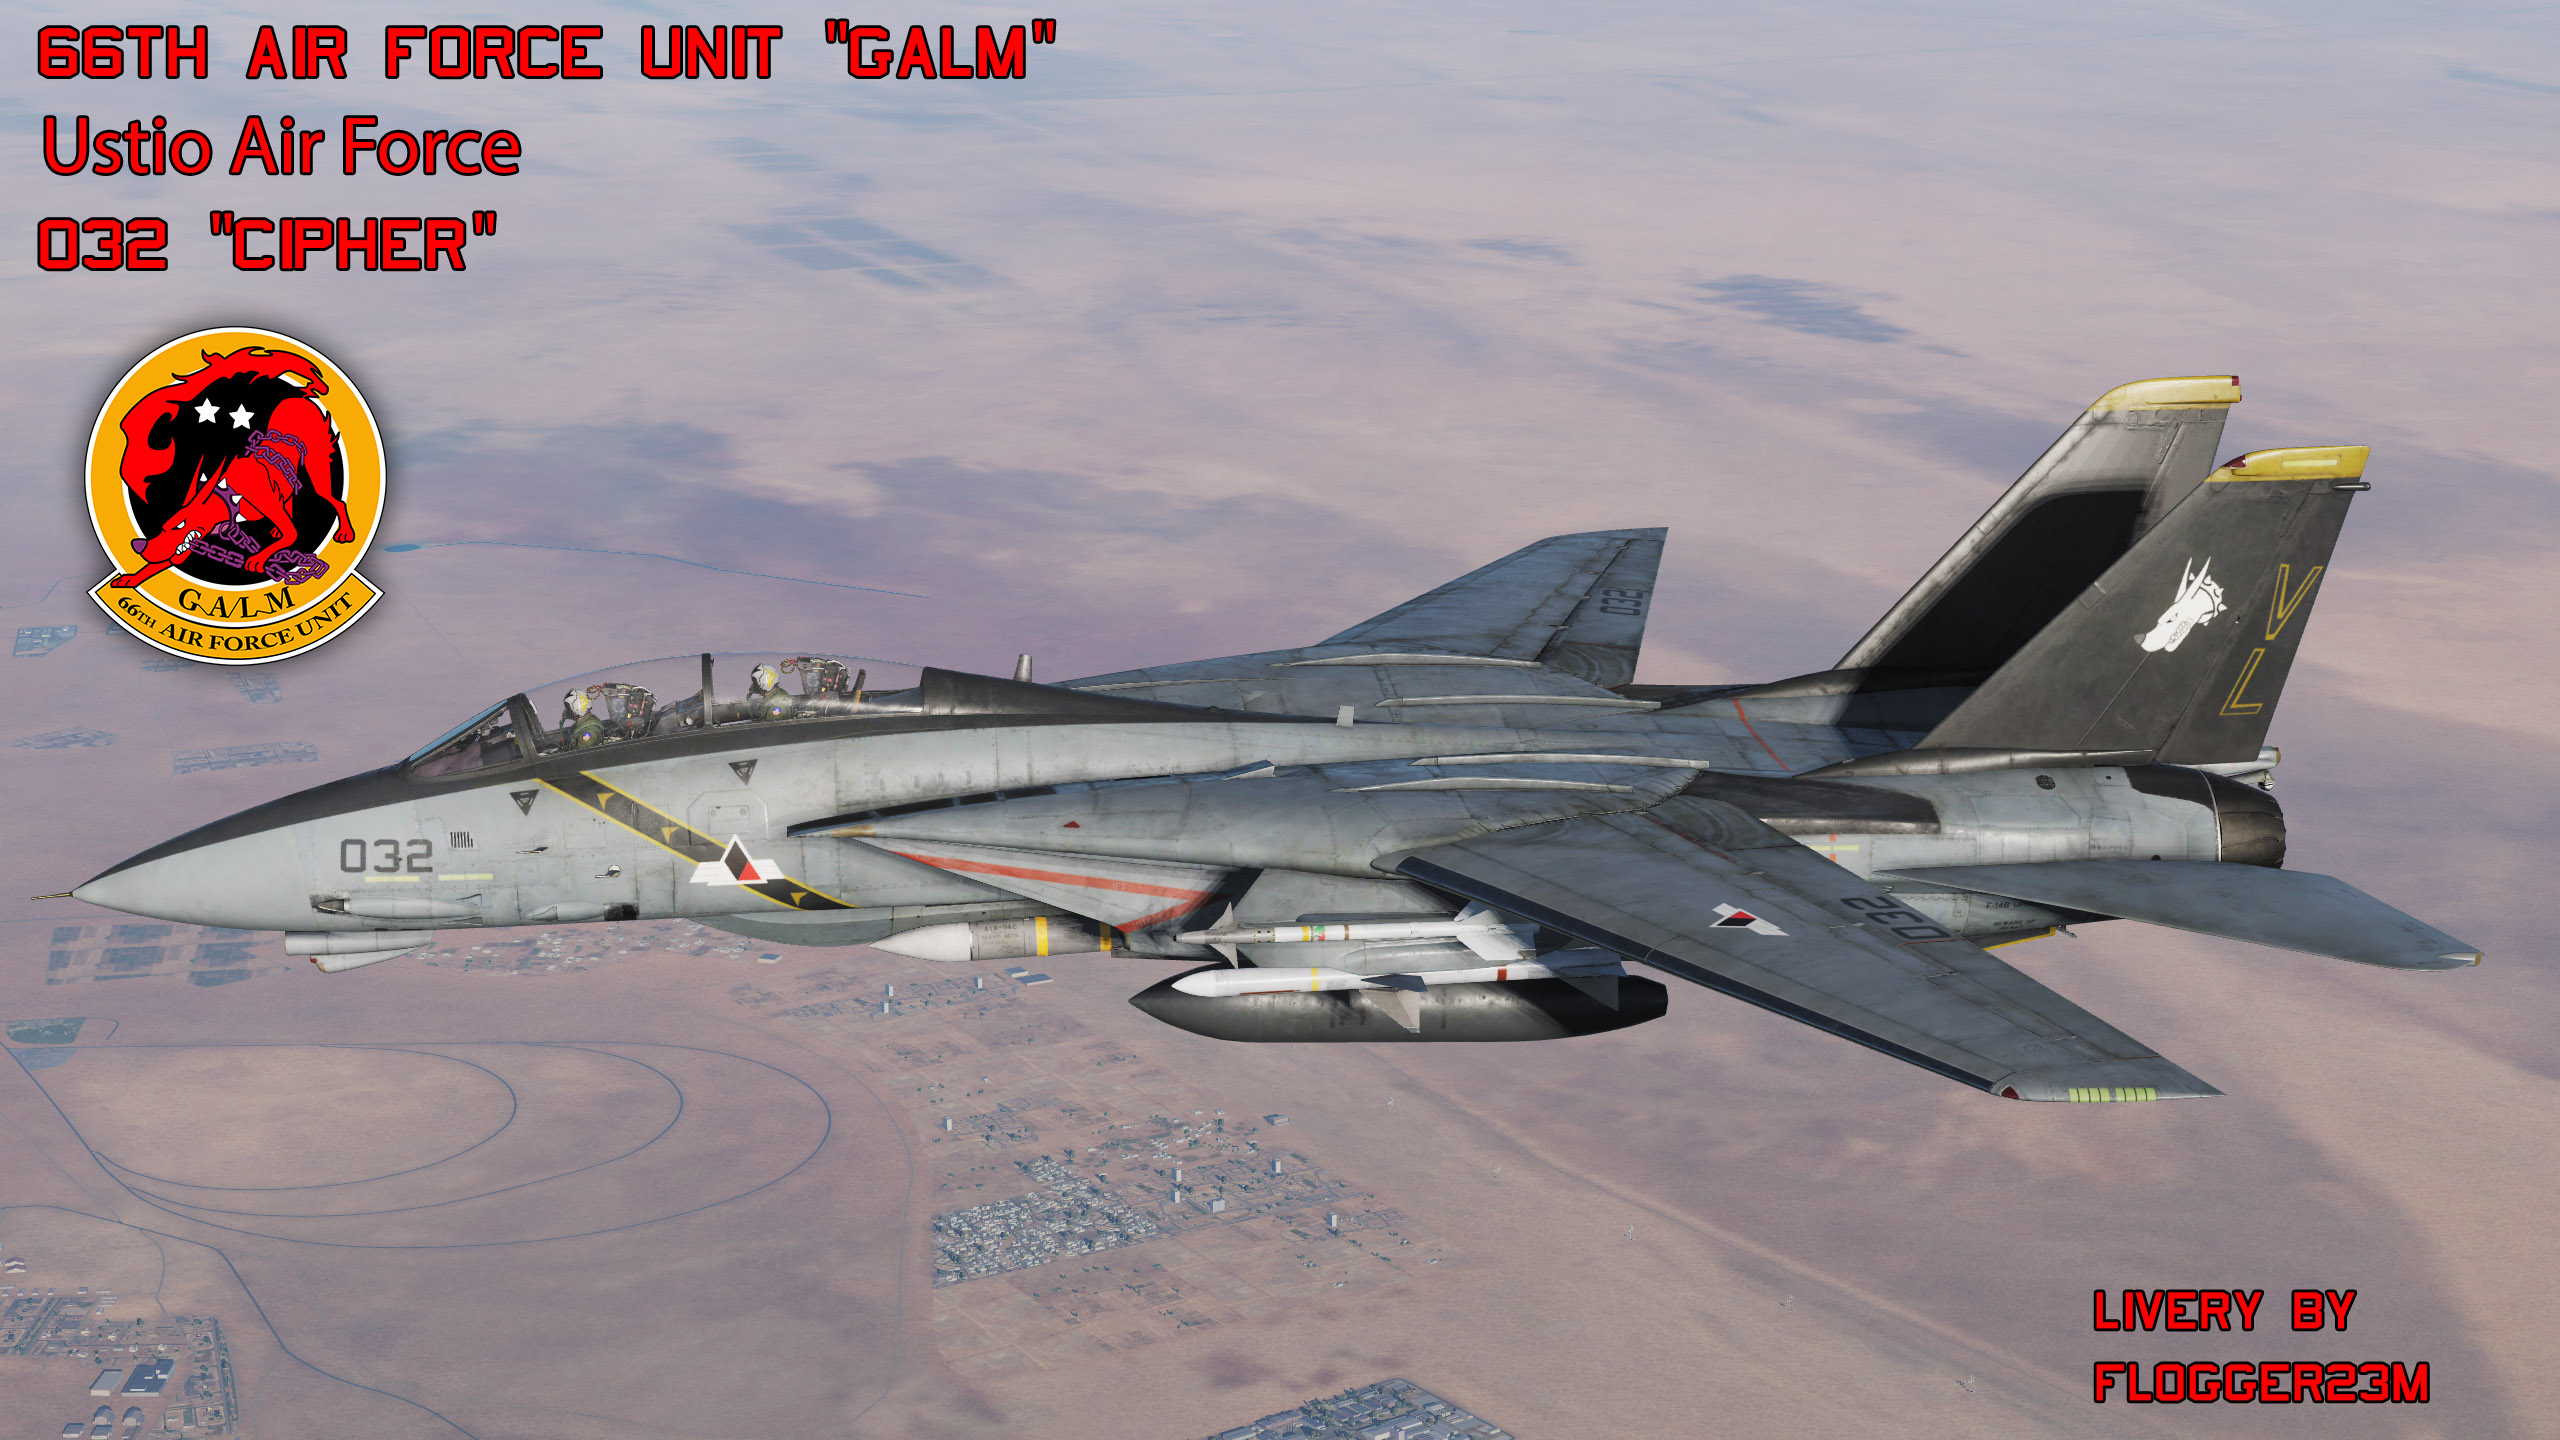 Galm Team 66th Air Force Unit 032 Cipher - Livery for F-14B - By Flogger23m